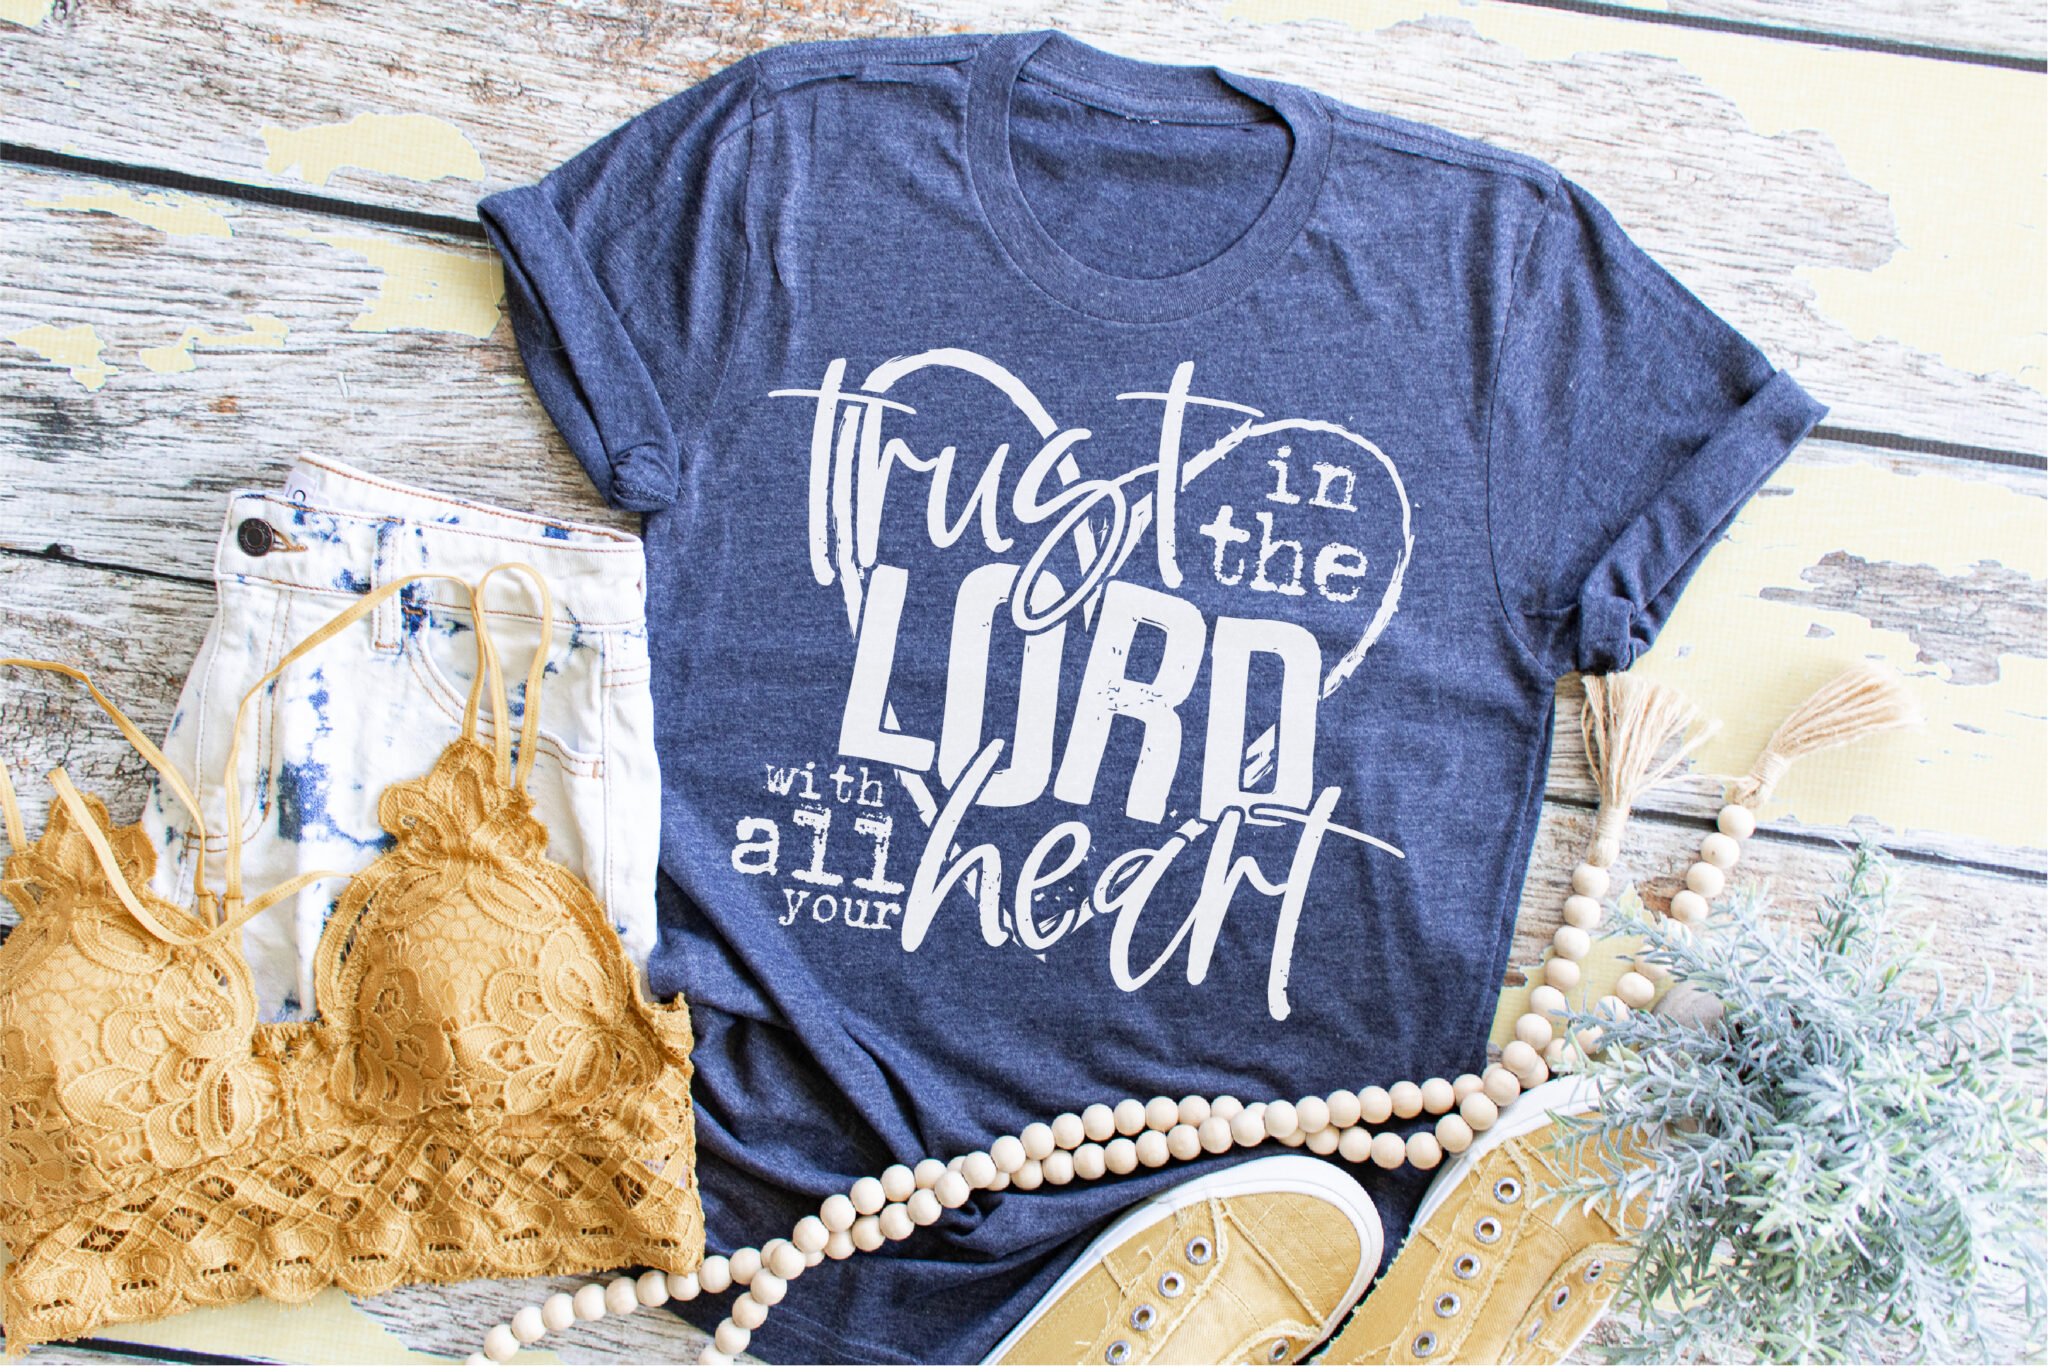 h2b2-trust-in-the-lord-with-all-your-heart-11-screen-print-transfer